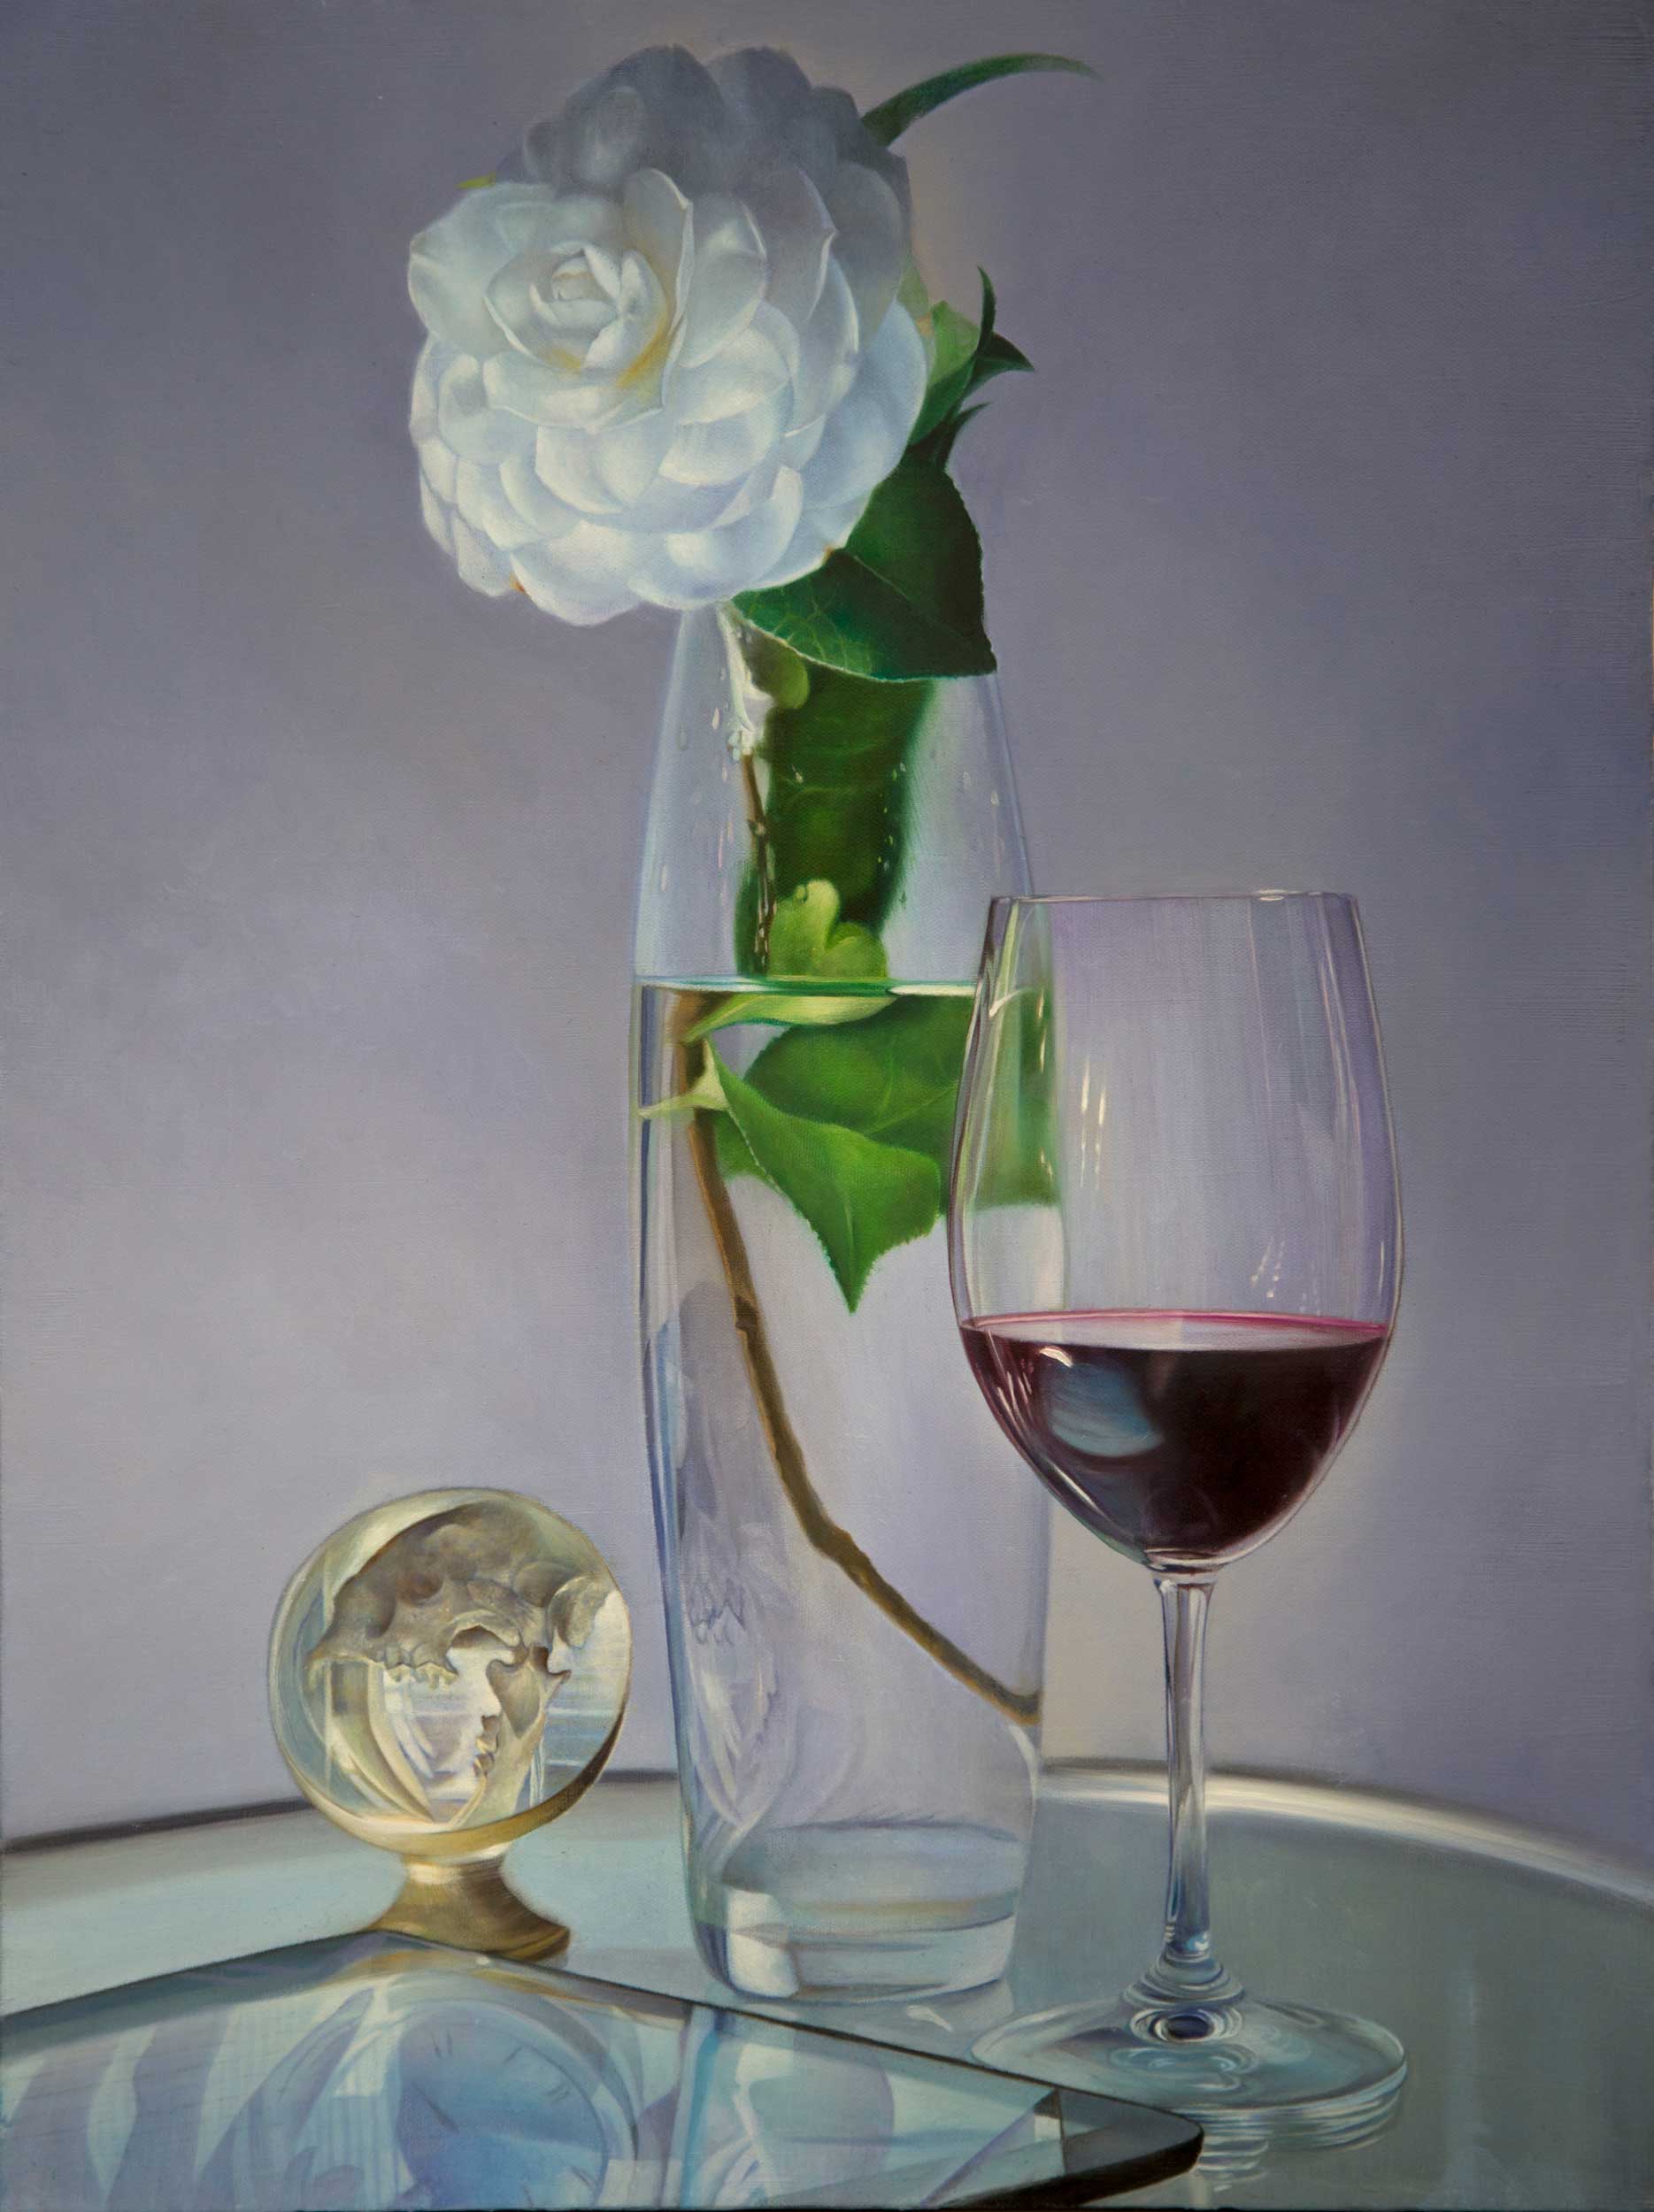 Contemporary realism - oil paintings - RealismToday.com